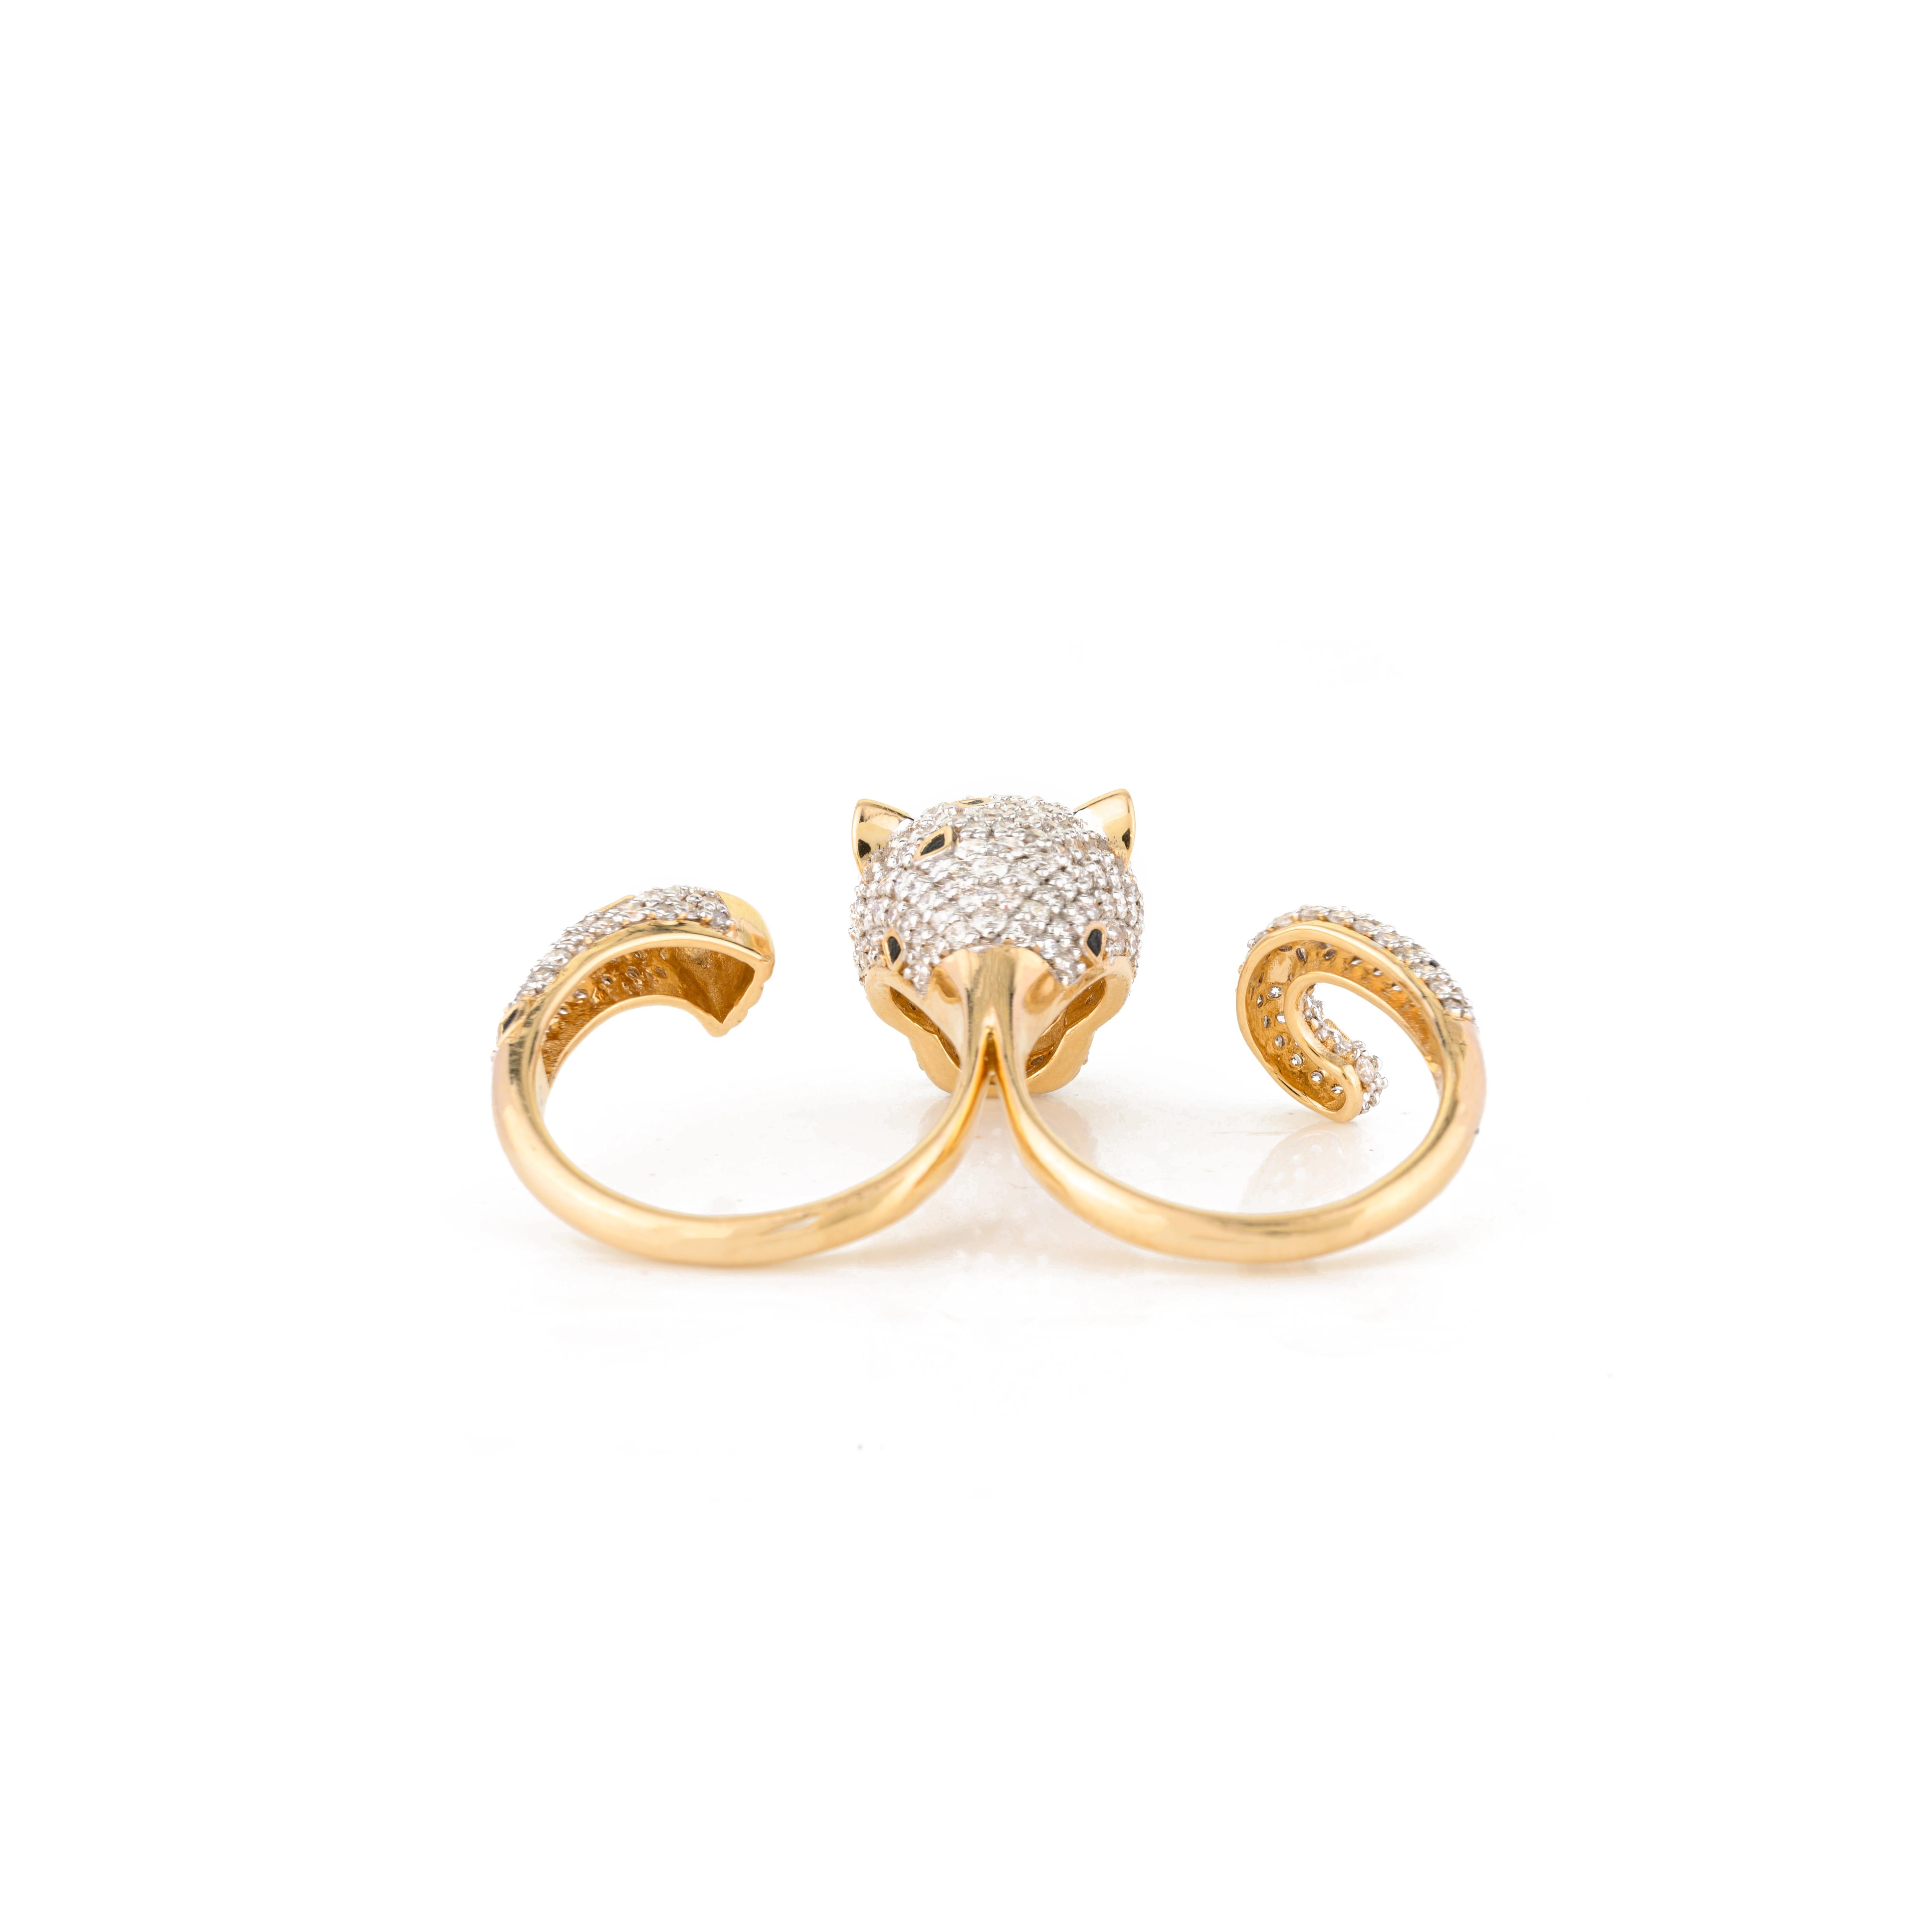 For Sale:  Statement 2.06 Carat Diamond Panther Double Finger Ring in 18k Yellow Gold 4